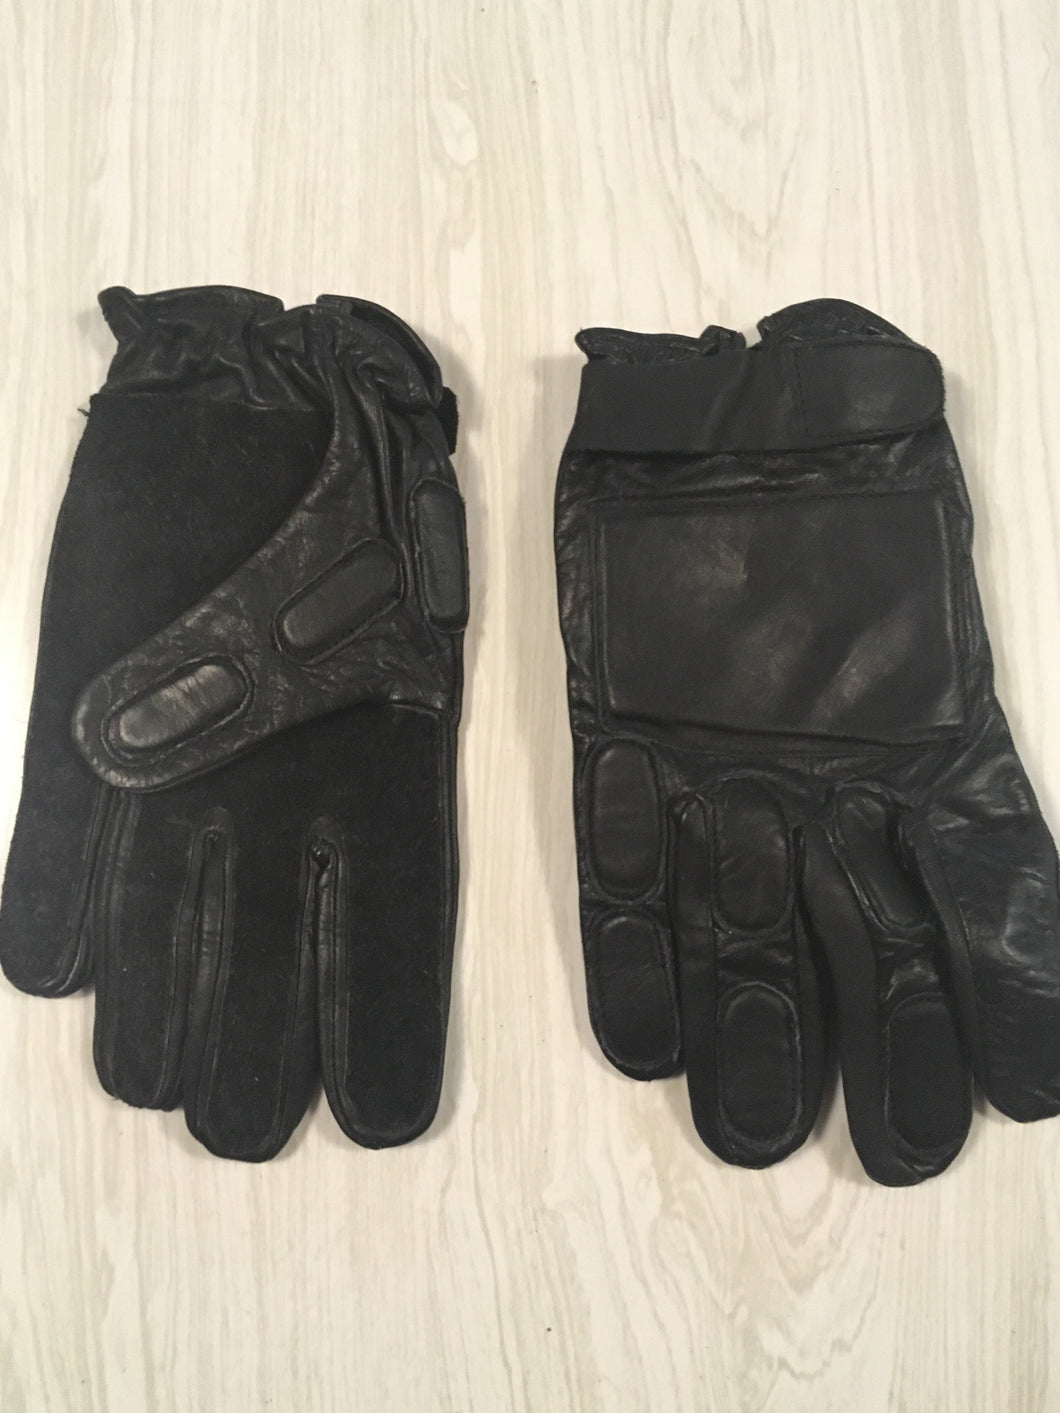 Leather Military Tactical Gloves/Possibly Medium with Nuckel Protectors~NOS